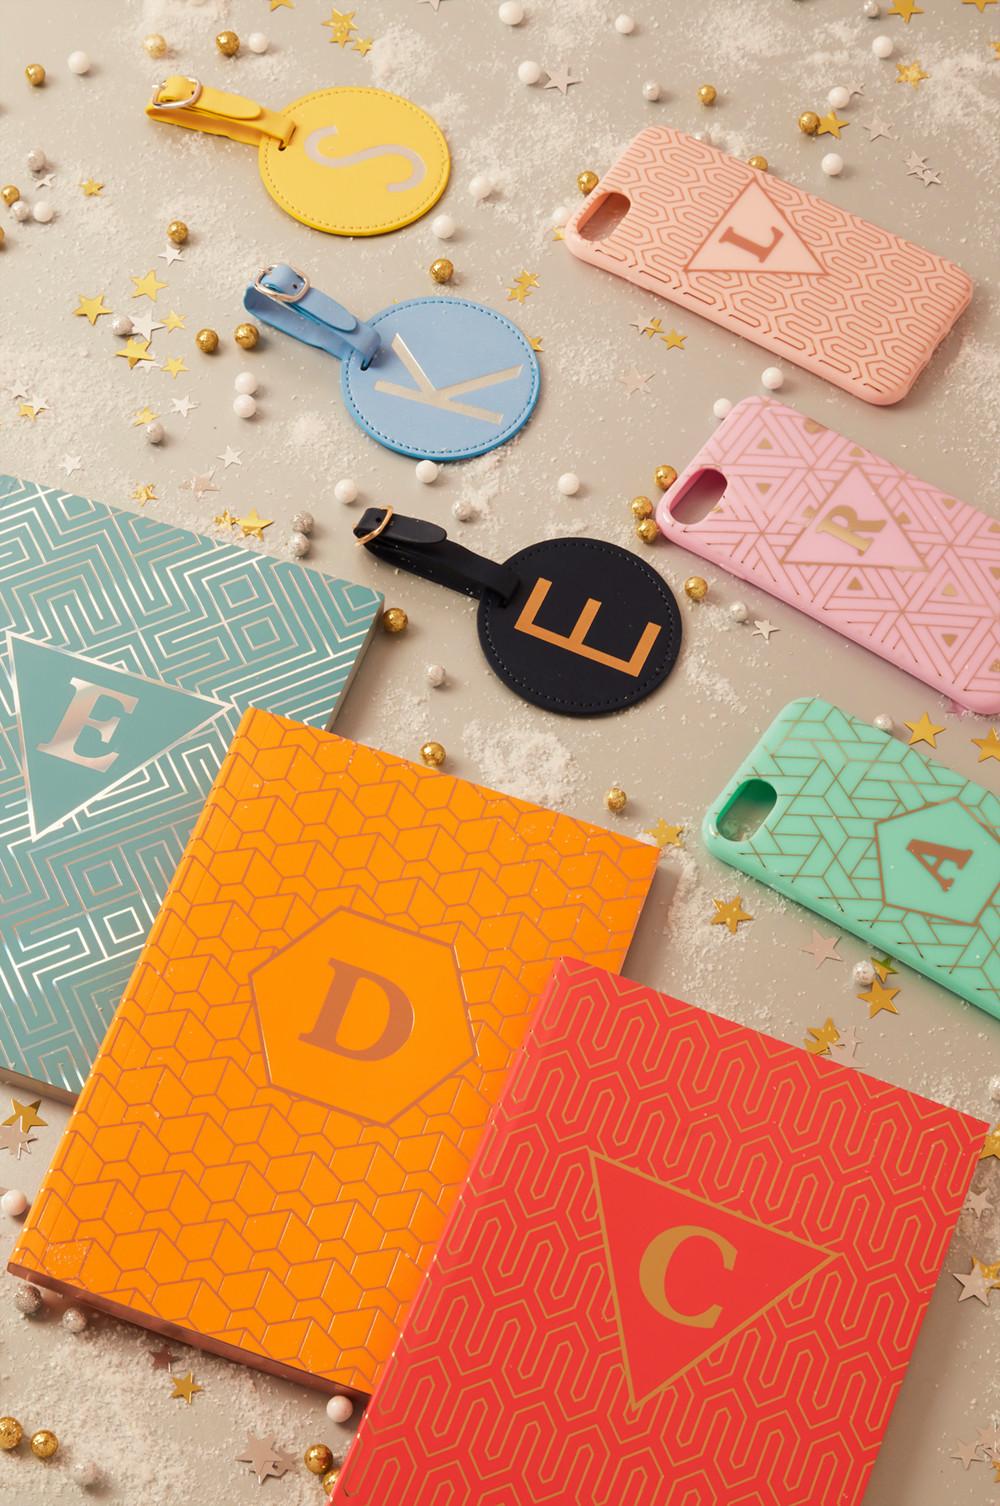 Primark's personalized initial notebooks & accessories